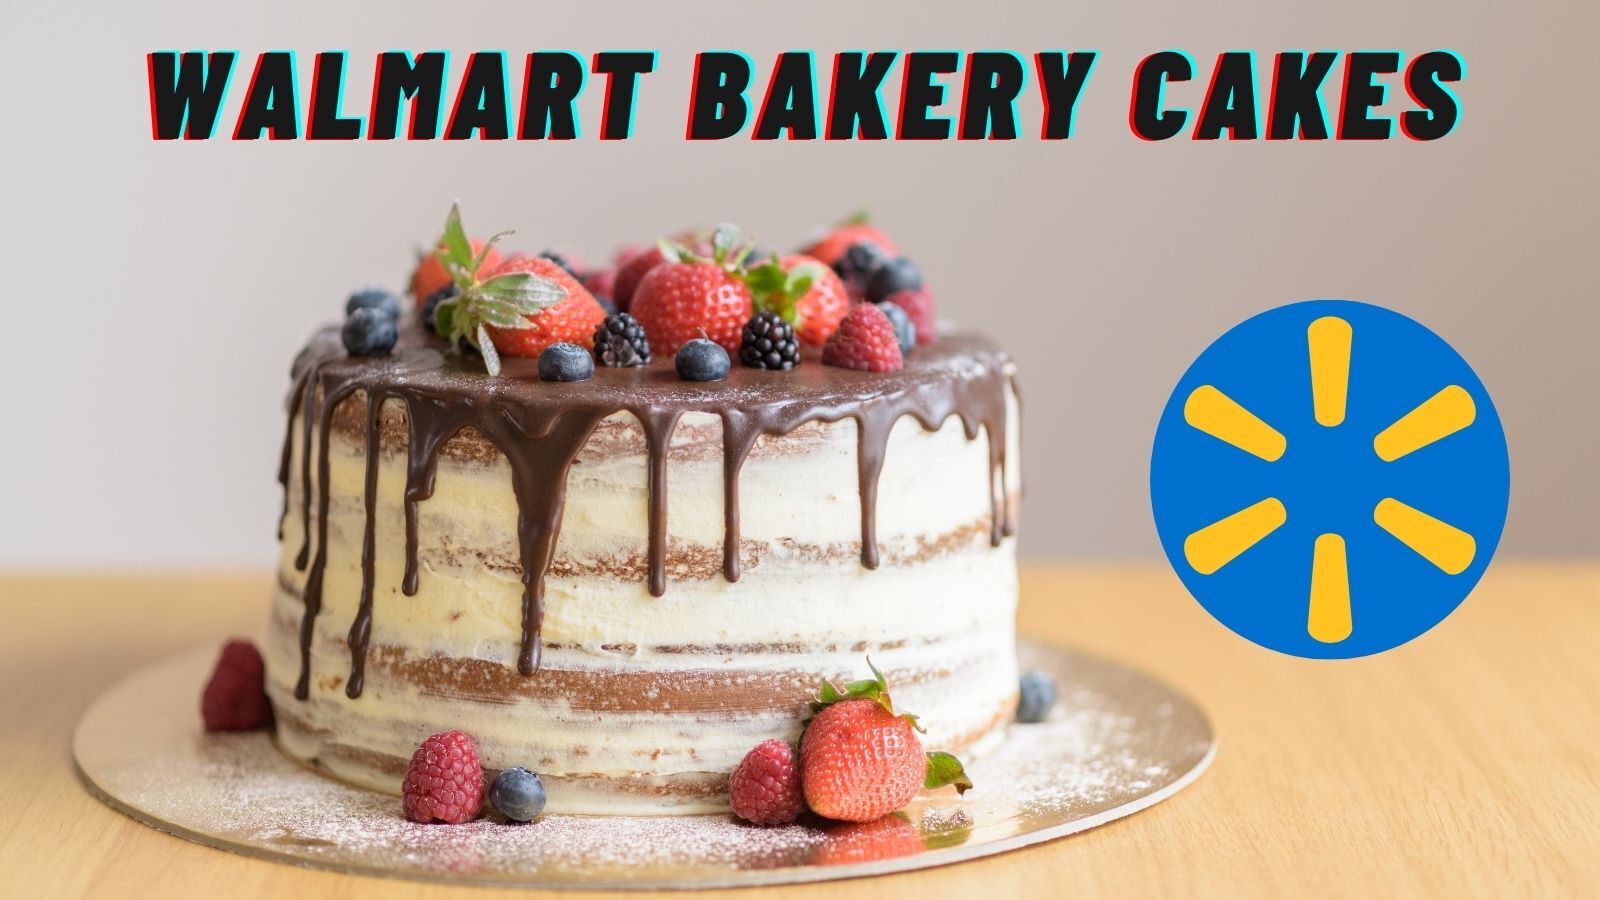 Walmart Bakery Cakes (A Full Guide)